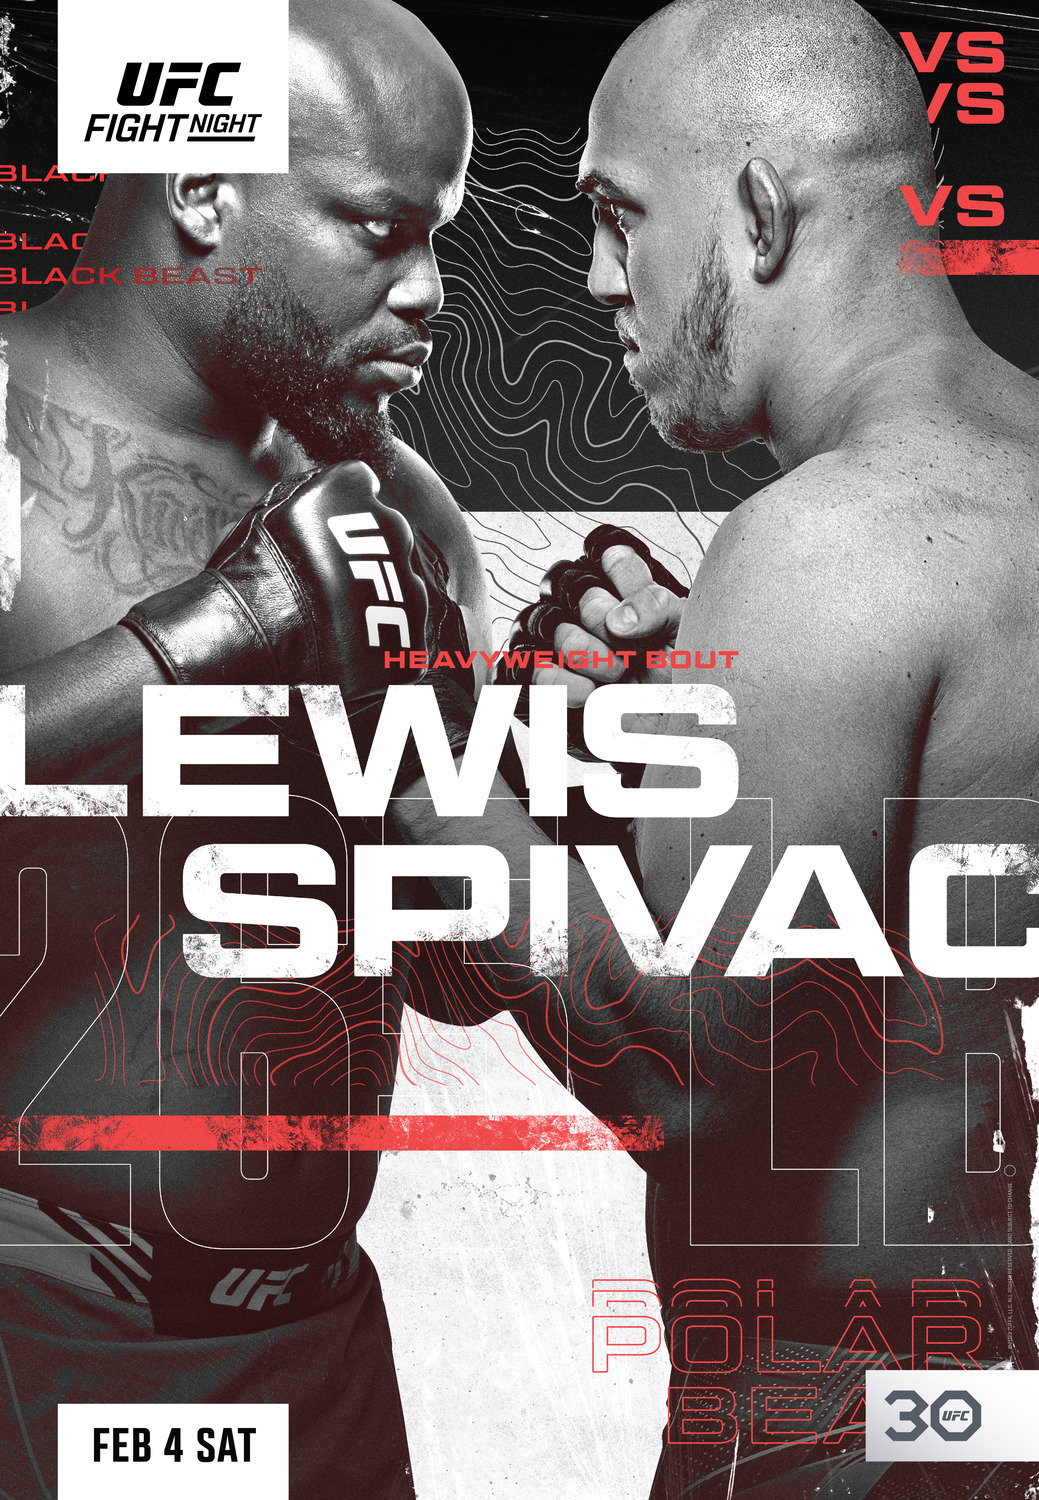 Extra Large TV Poster Image for UFC Fight Night: Lewis vs Spivac 